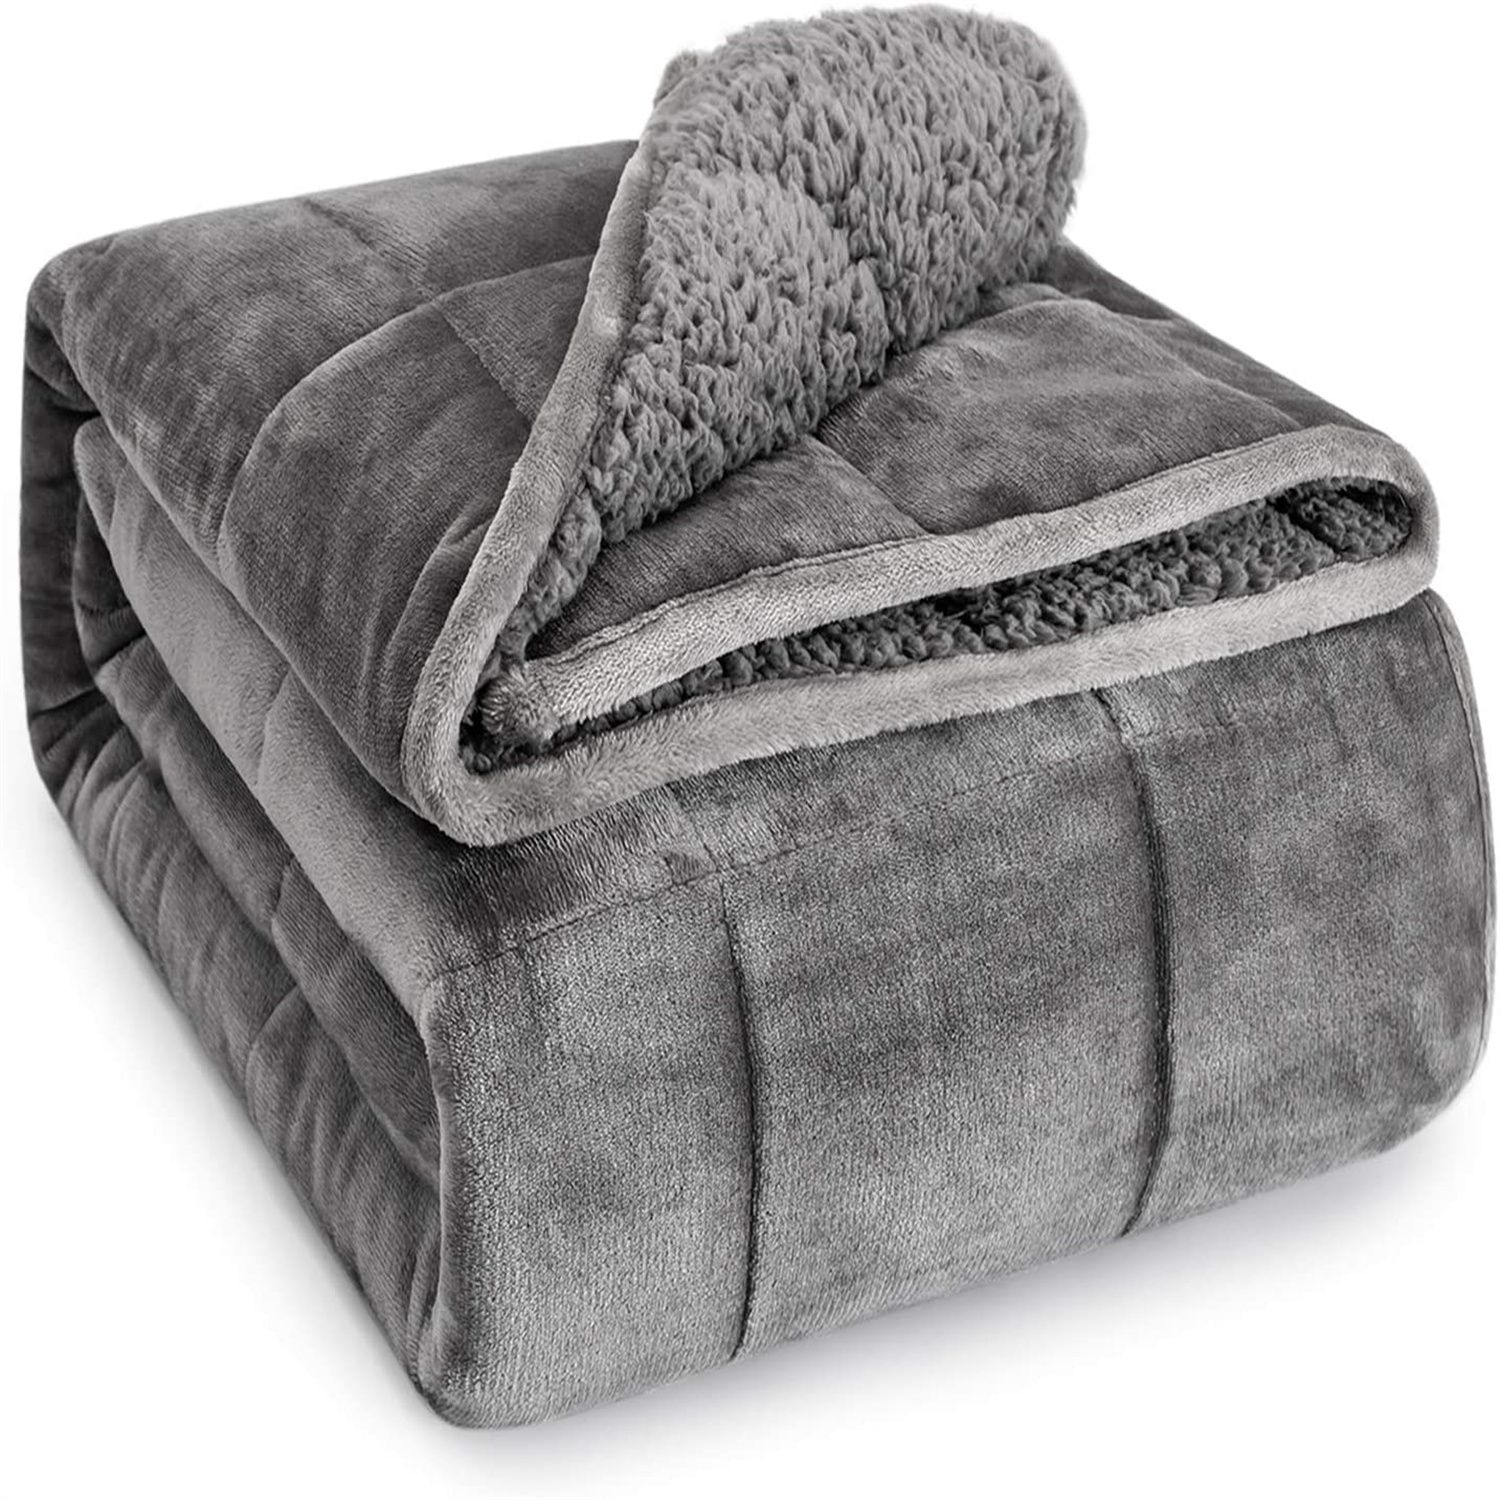 Sivio 15lbs Weighted Blanket for Adult, Twin Size Fuzzy Heavy Throw Blanket with Plush Flannel, 4... | Walmart (US)